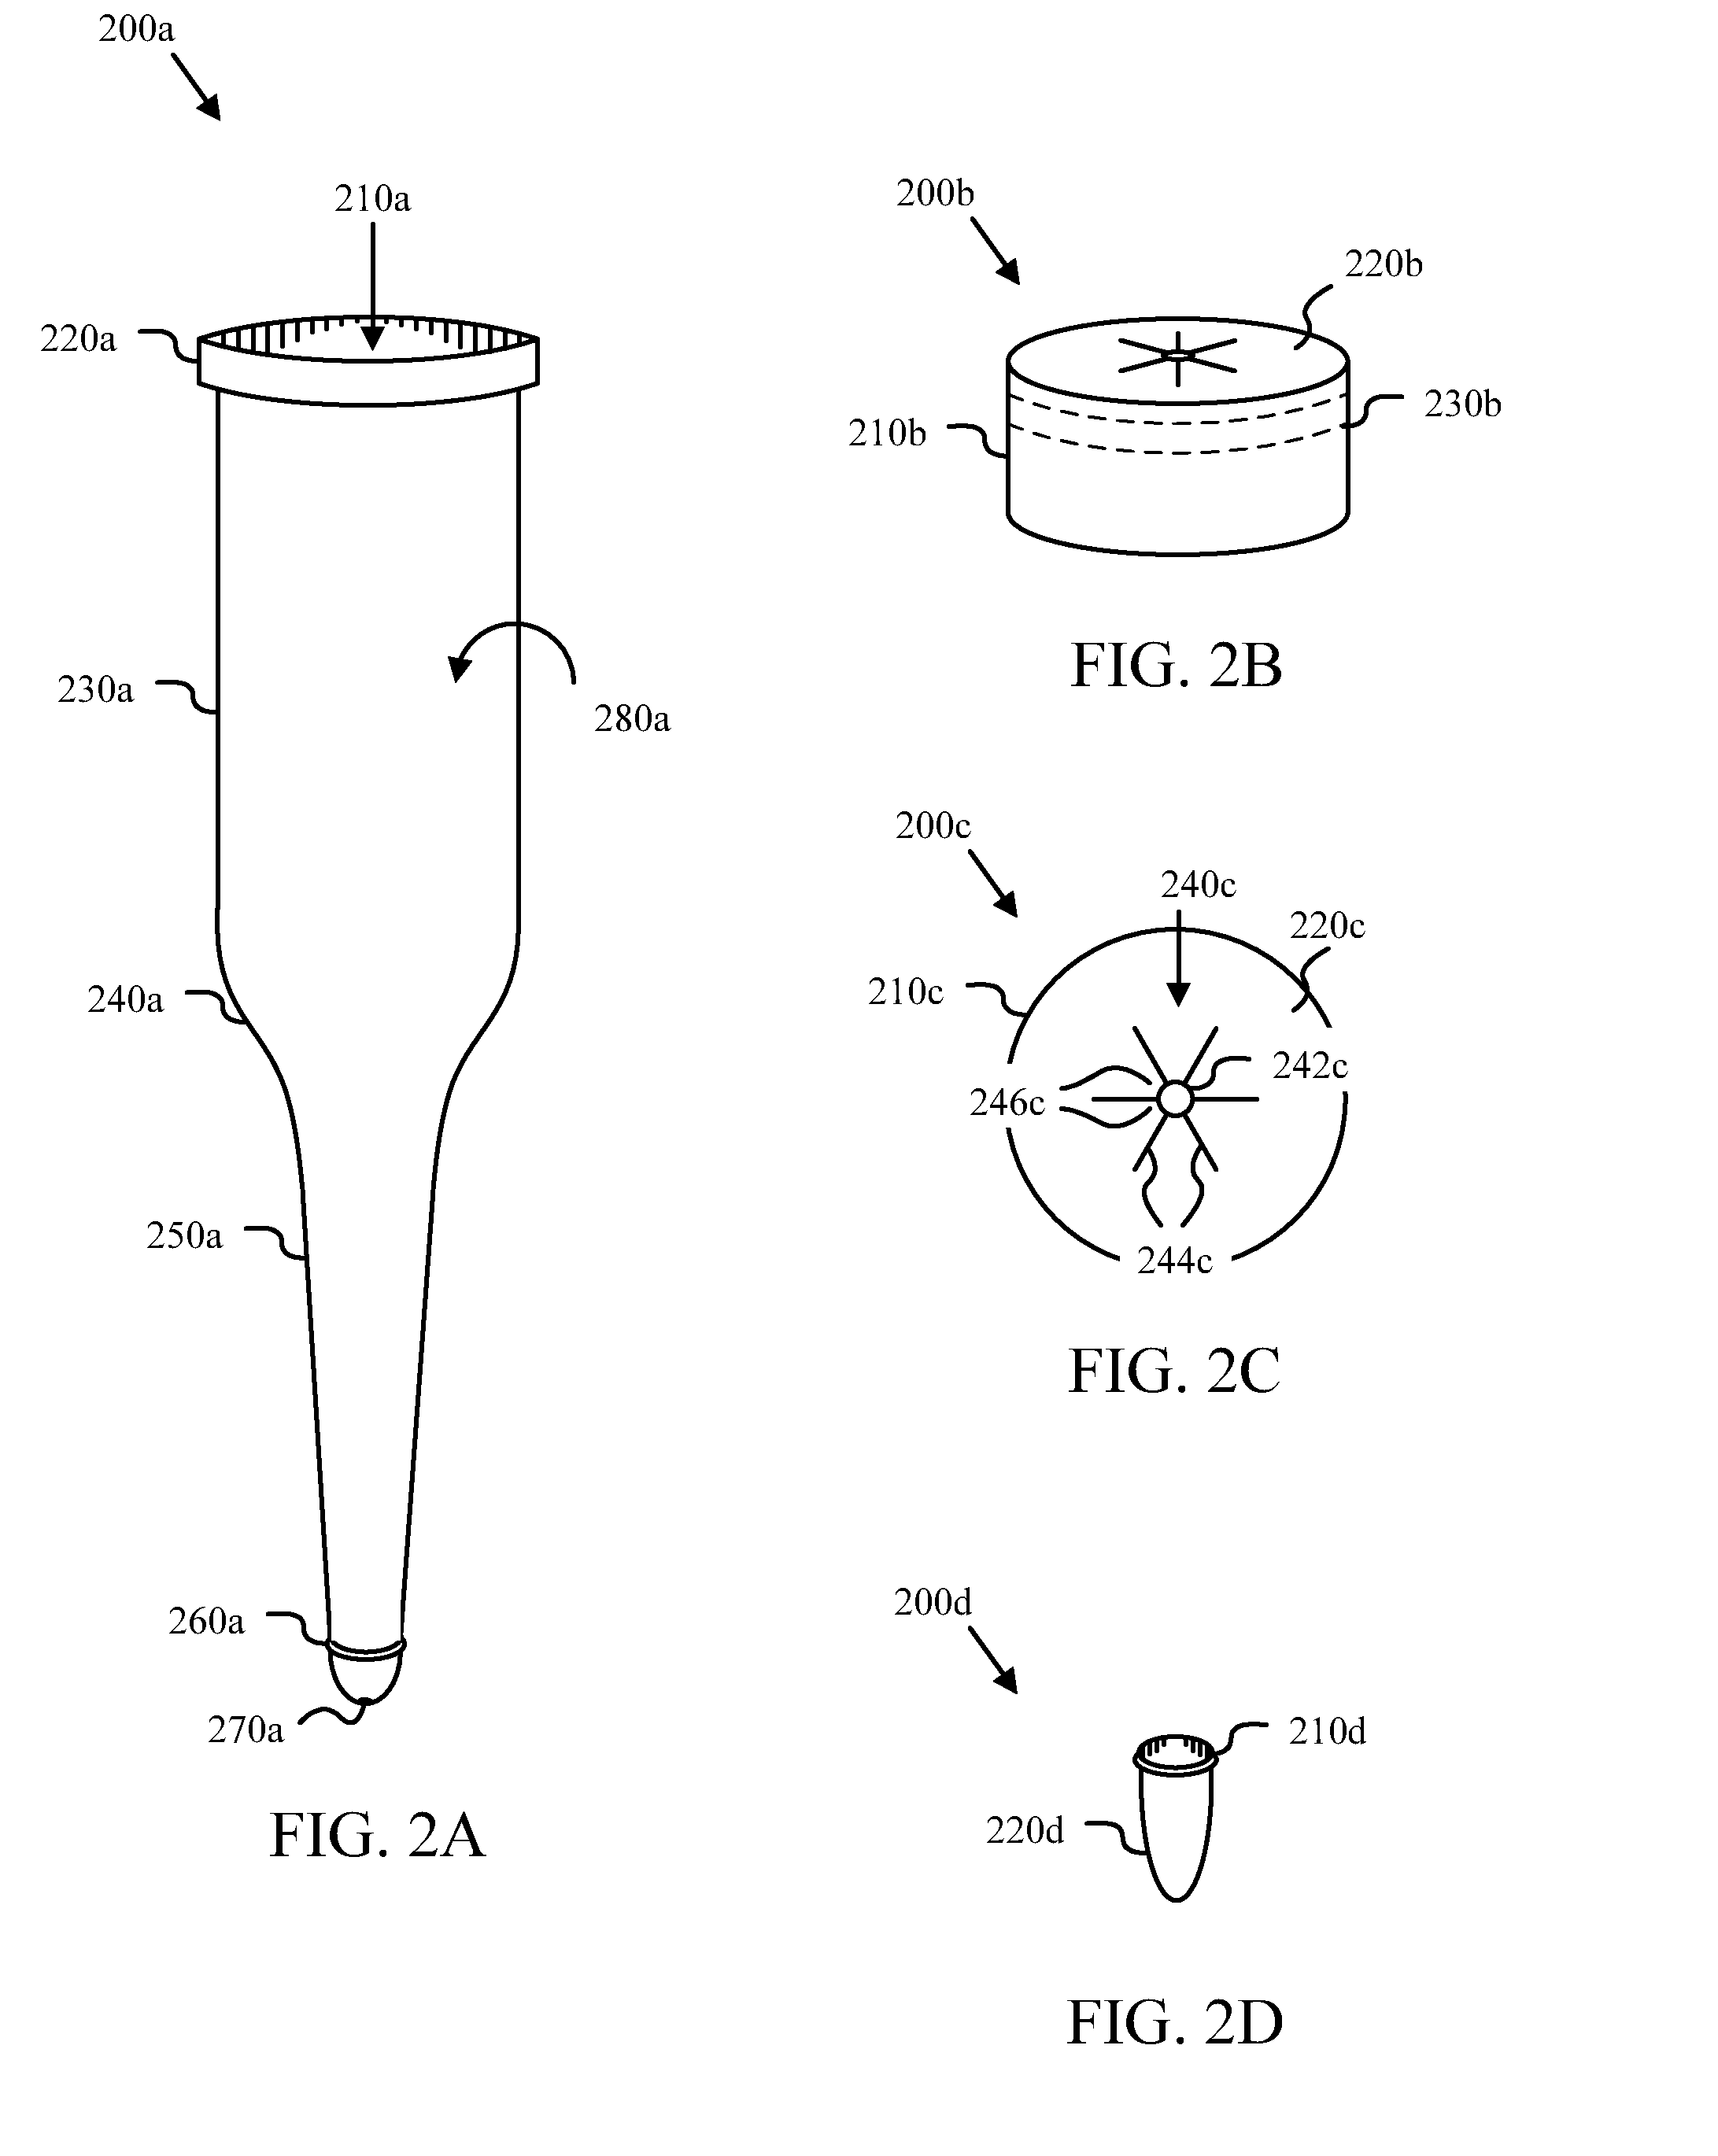 Herbicide Delivery Apparatus and Method